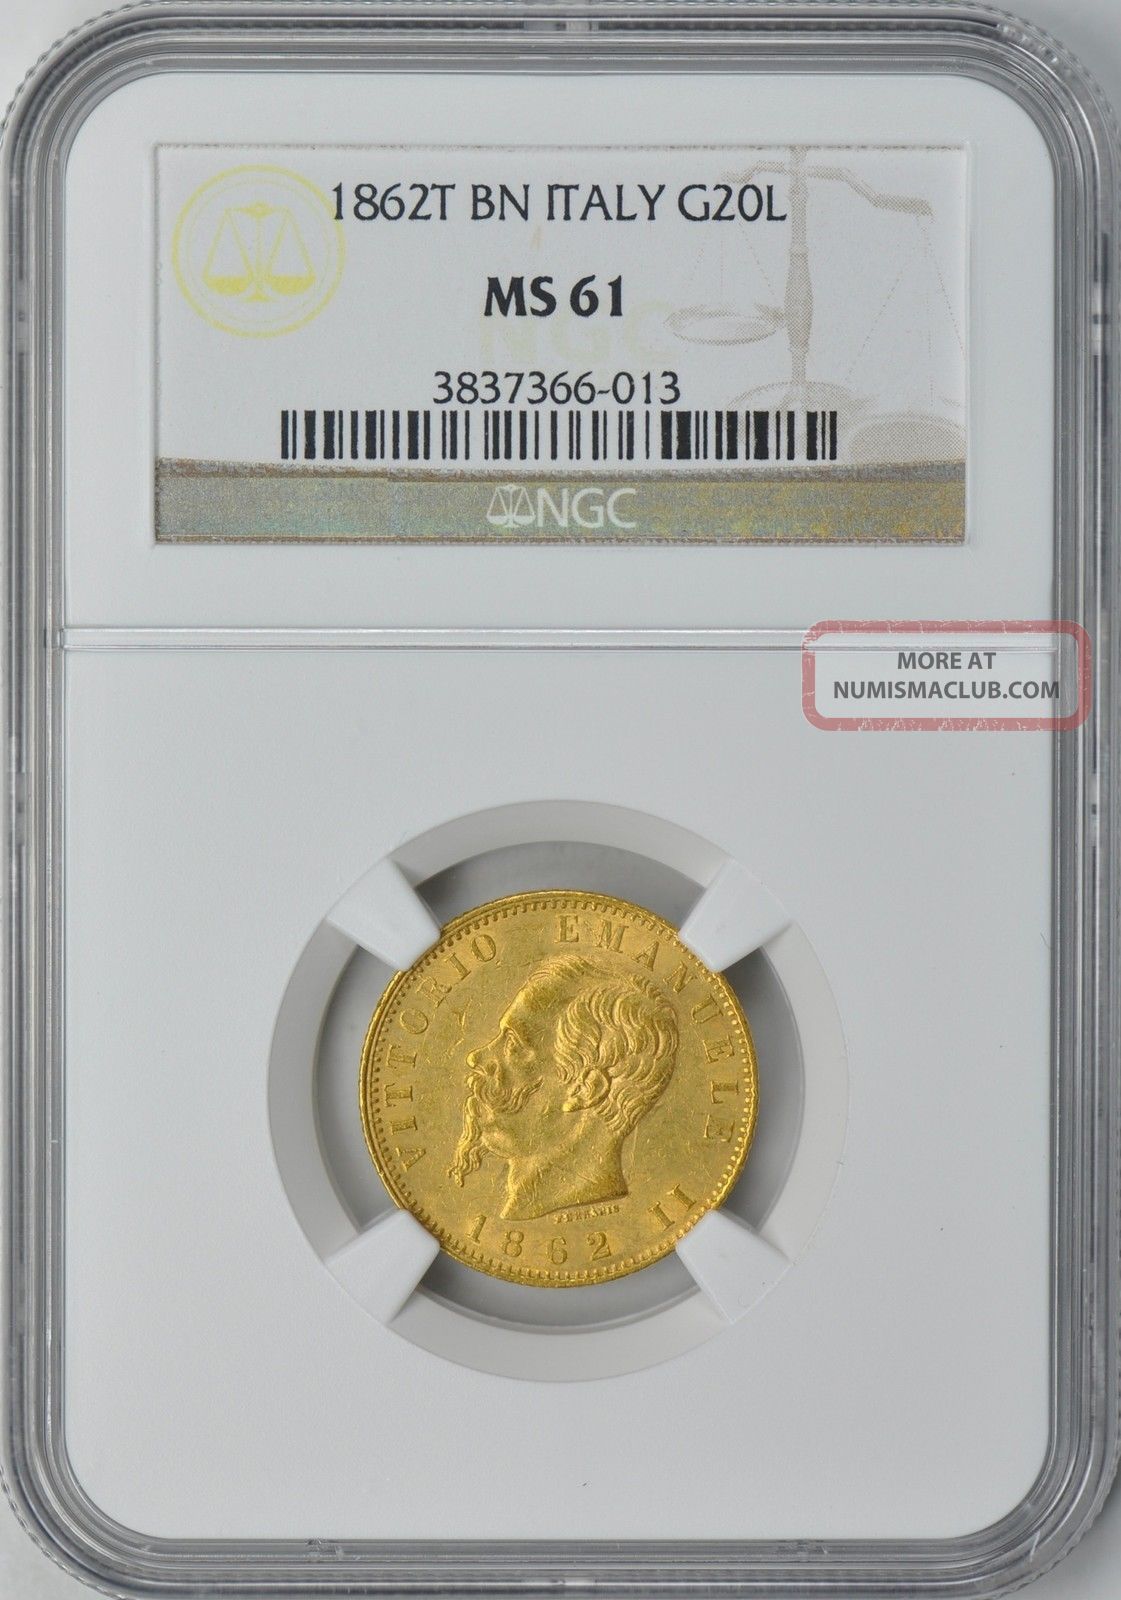 Italy 1862 - T Bn Gold 20 Lire Ngc Ms - 61 (0. 1867 Oz. Gold)